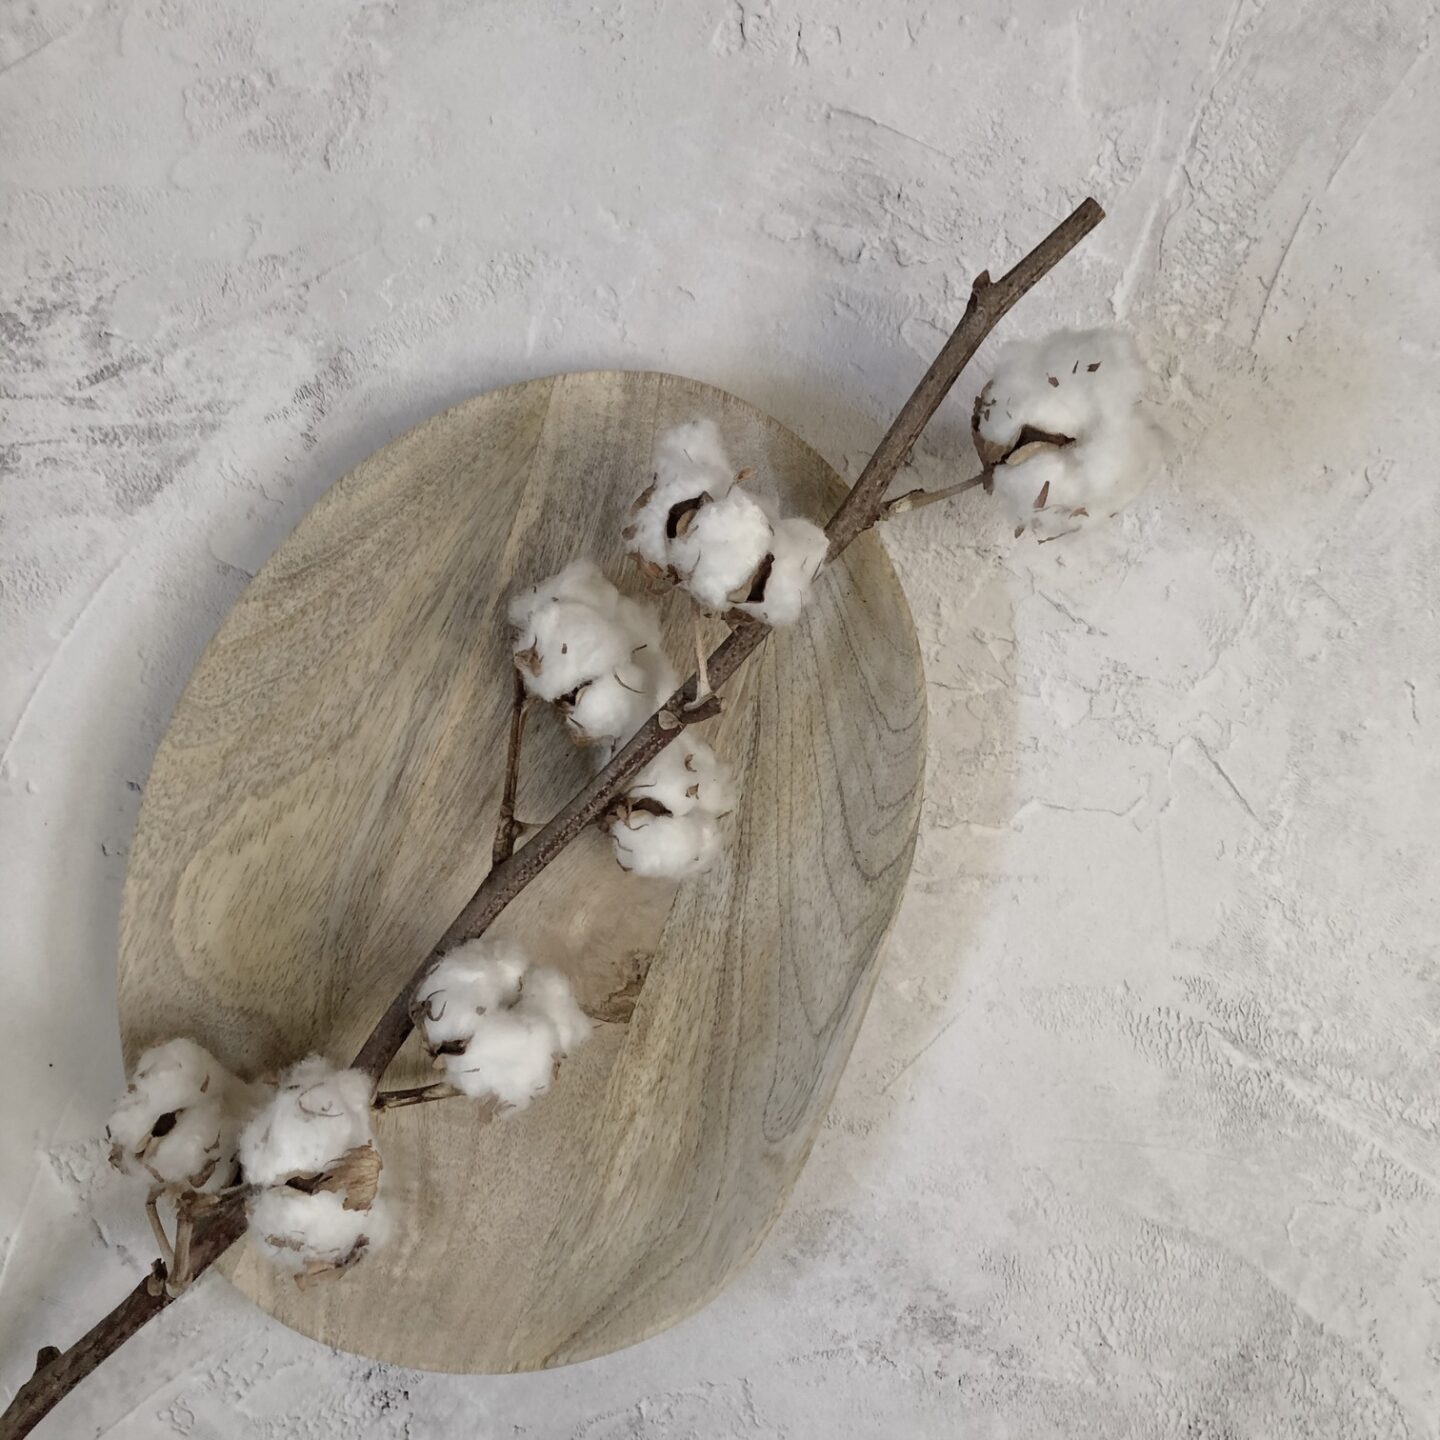 Cotton flowers on a wooden tray